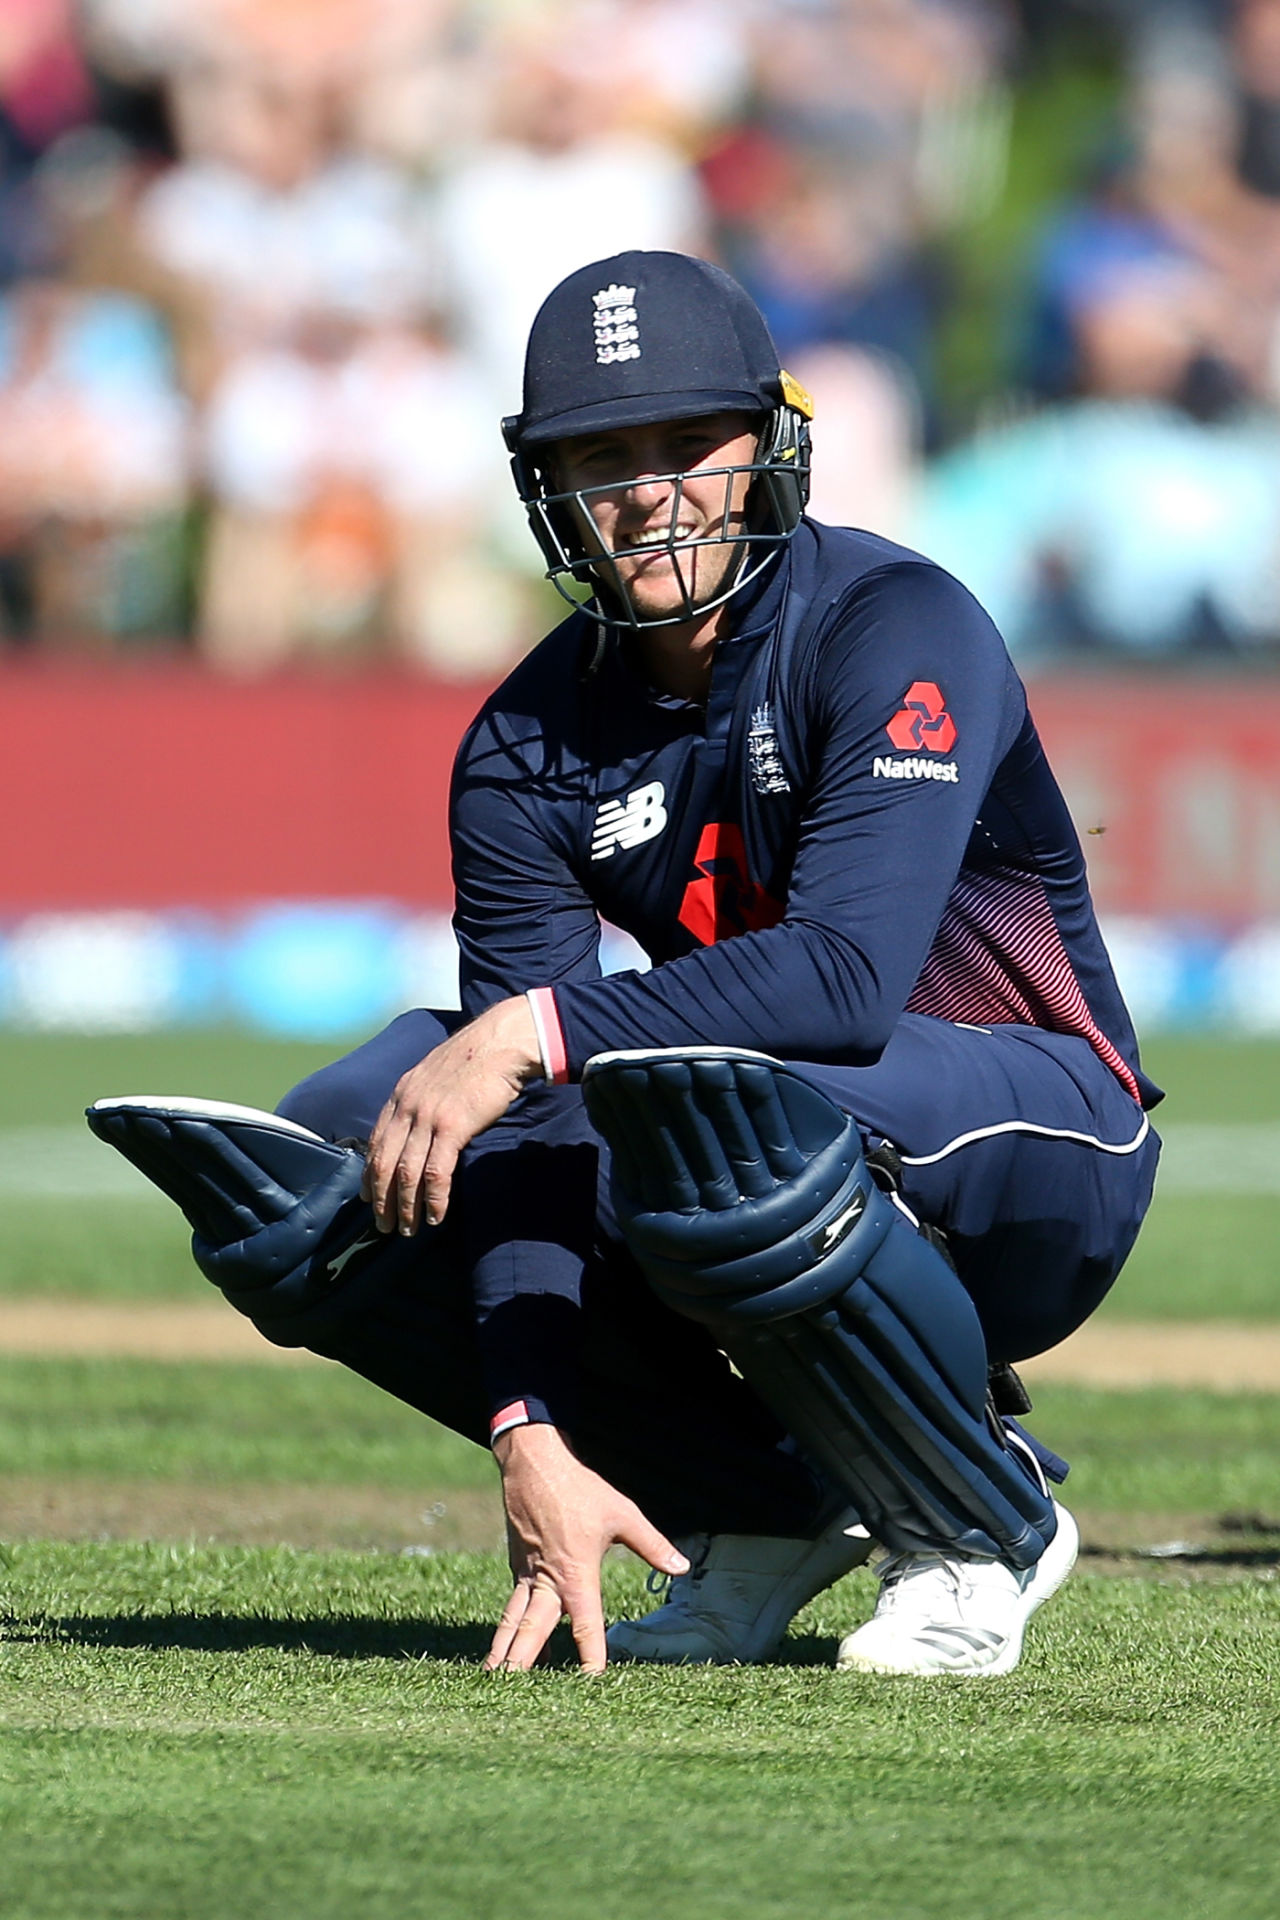 Jason Roy takes a moment to compose himself after taking a blow to the box, New Zealand v England, 4th ODI, Dunedin, March 7, 2018